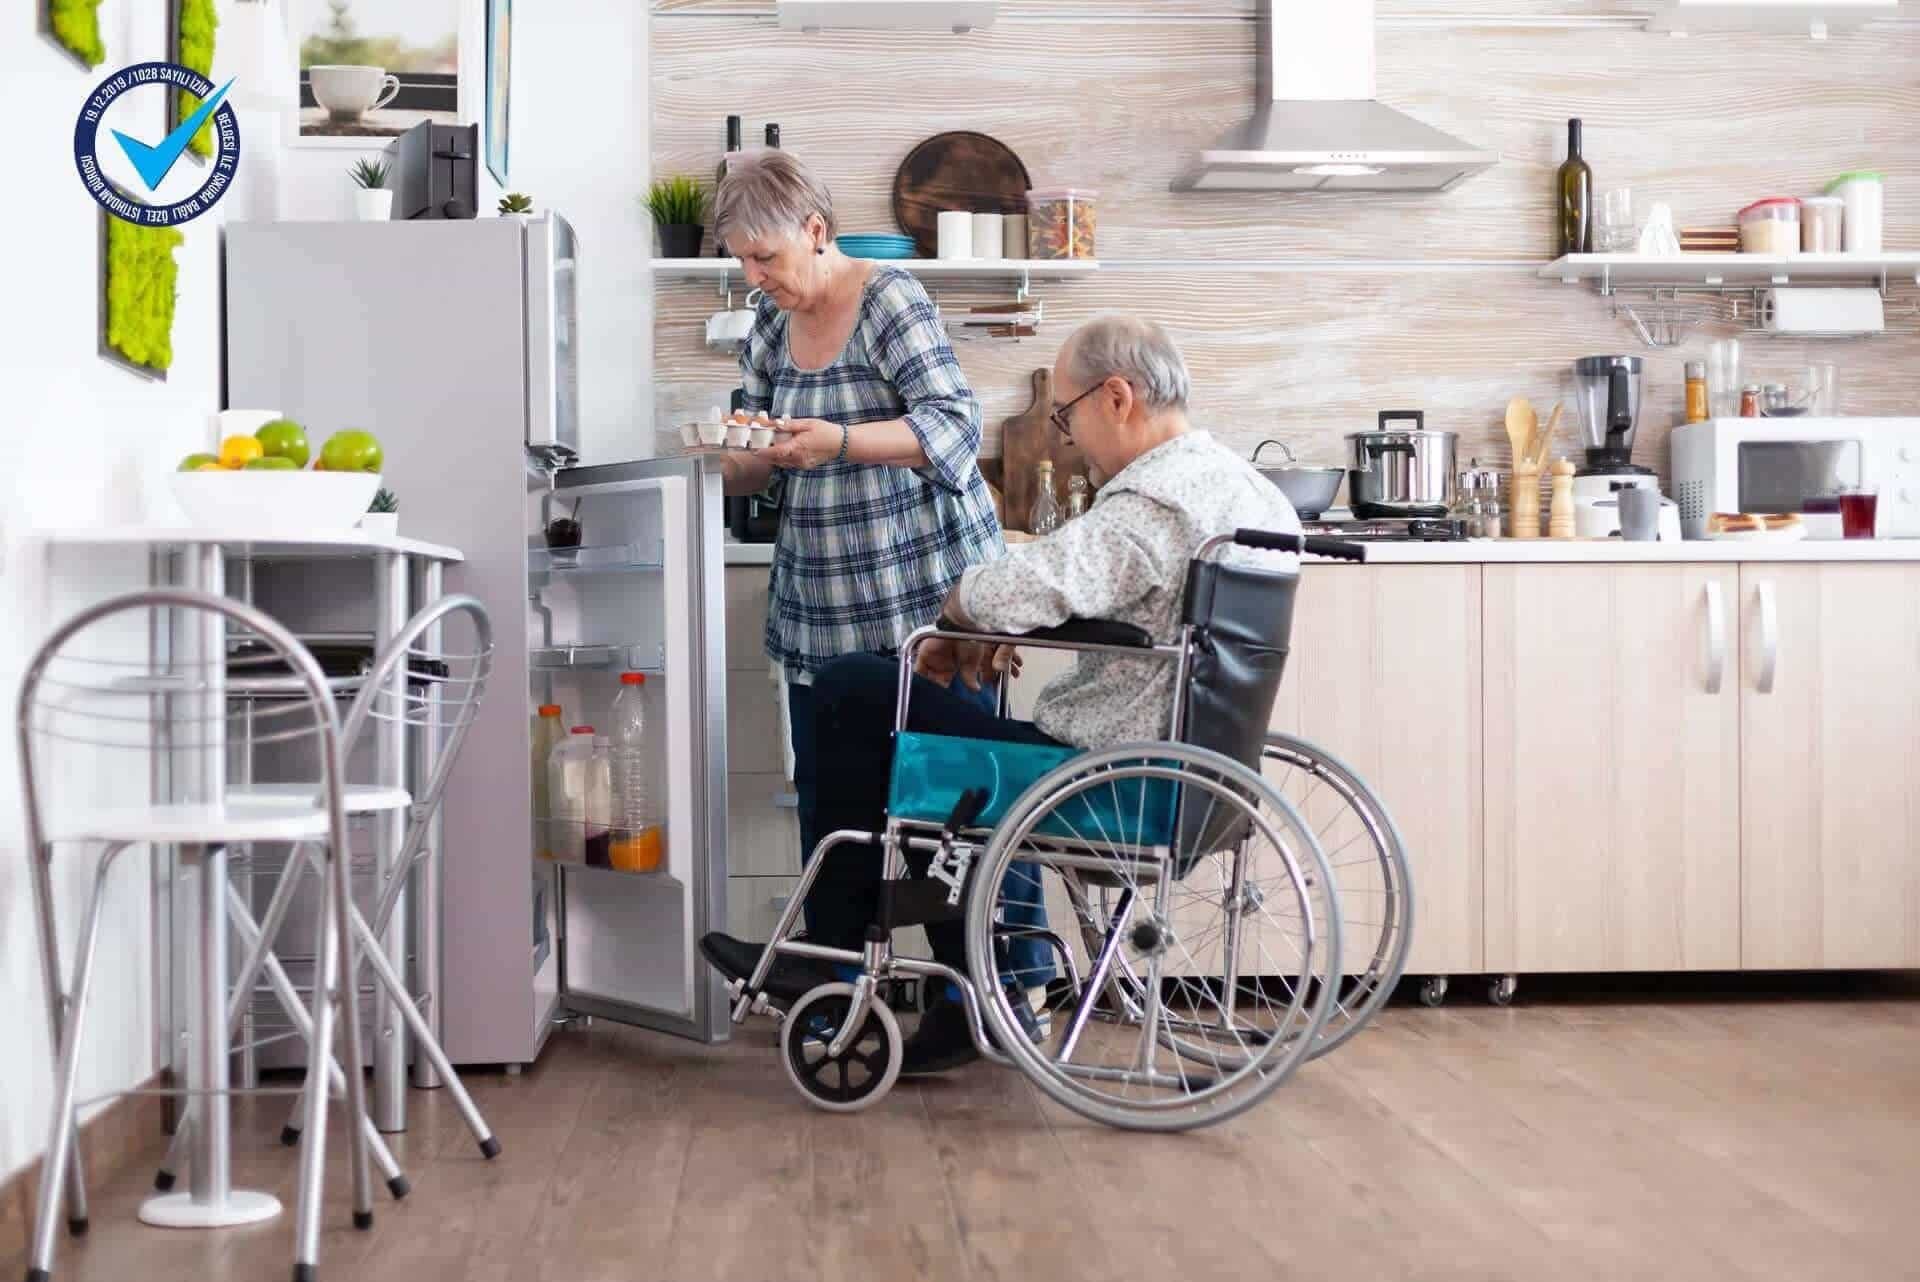 Elderly care at home